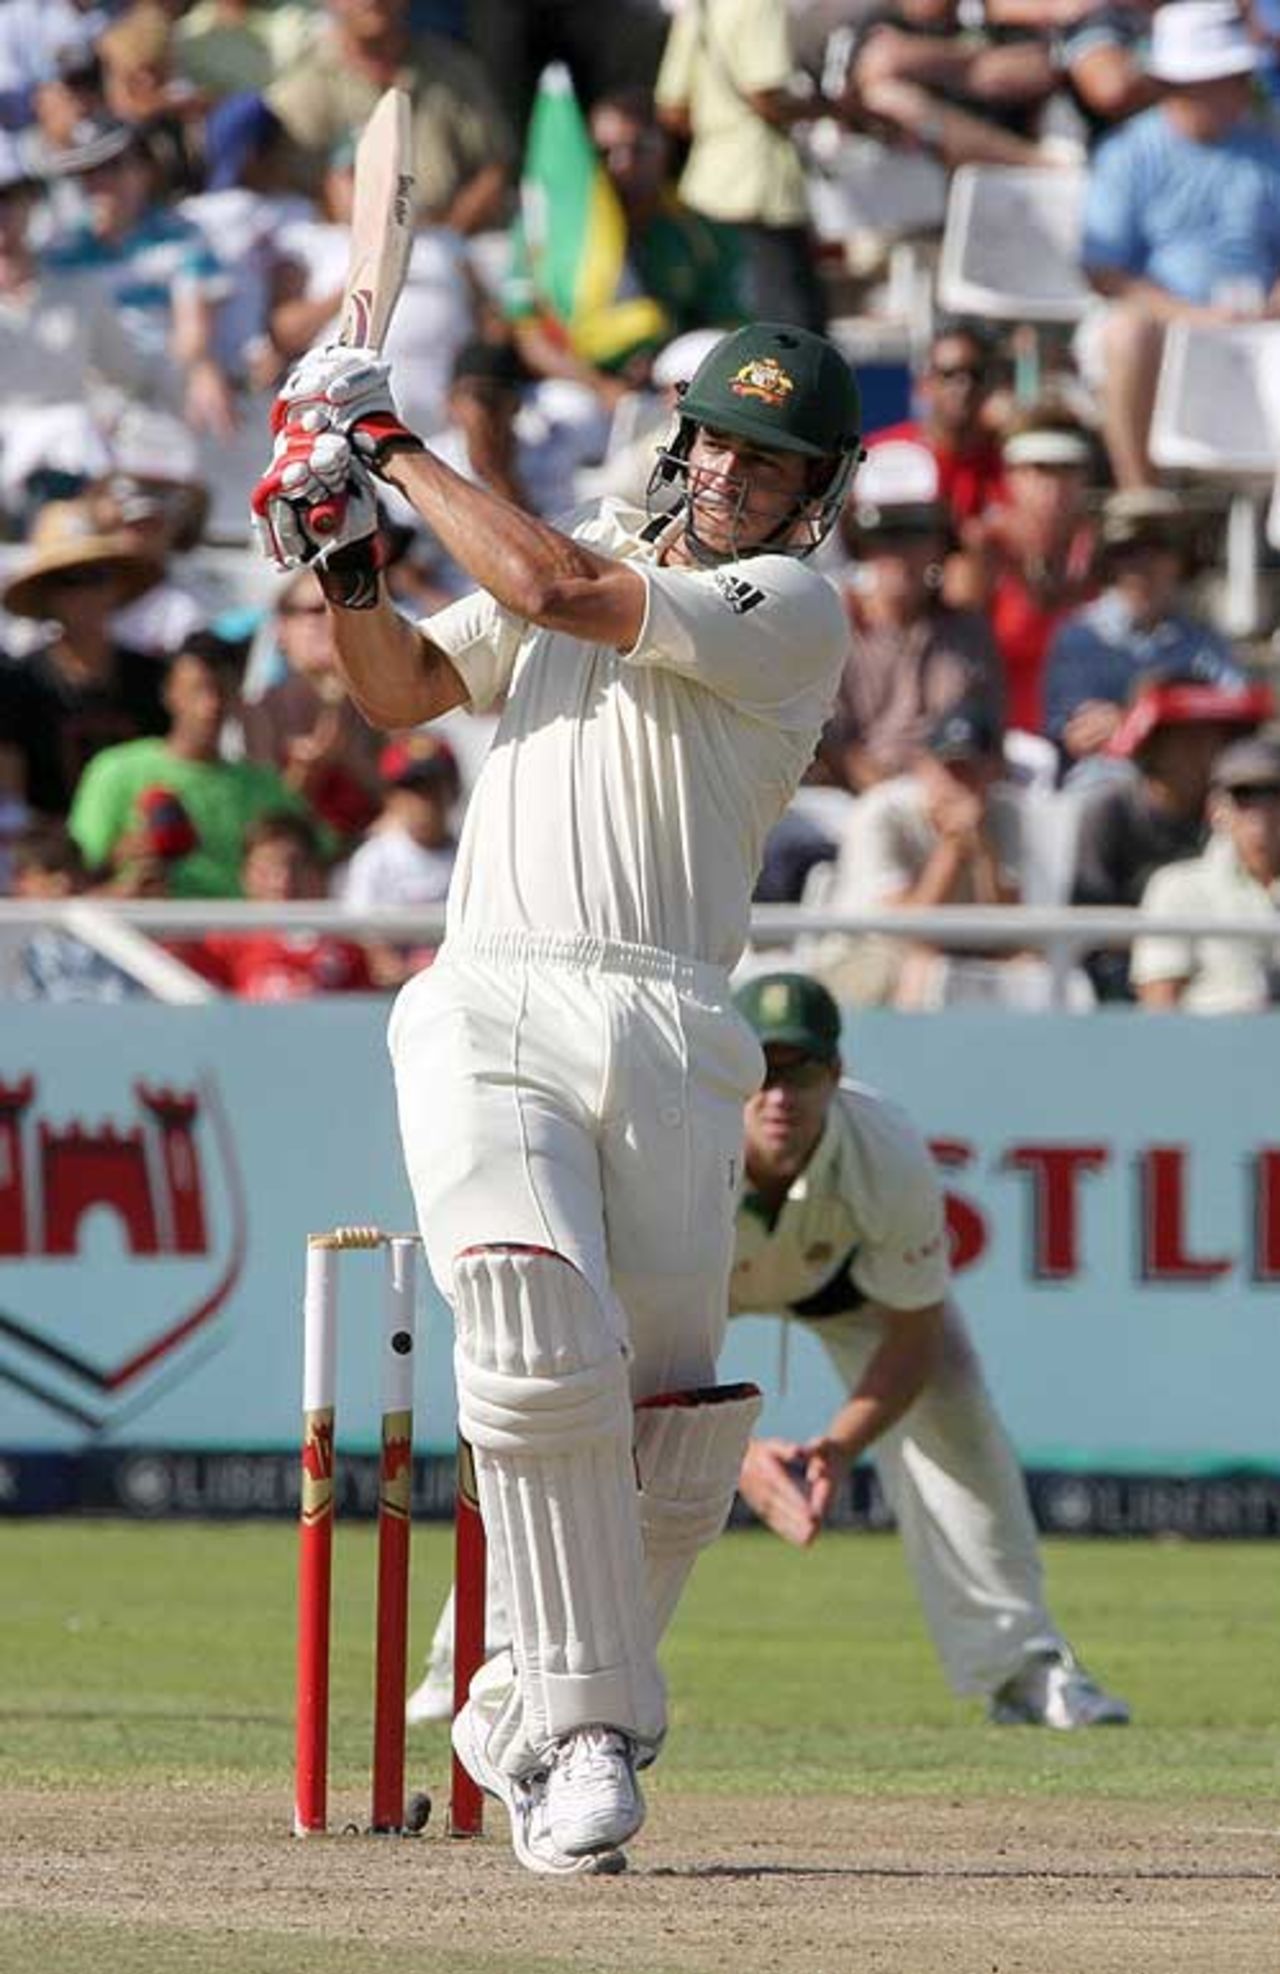 Mitchell Johnson swats one away during a stunning assault, South Africa v Australia, 3rd Test, 4th day, Cape Town, March 22, 2009